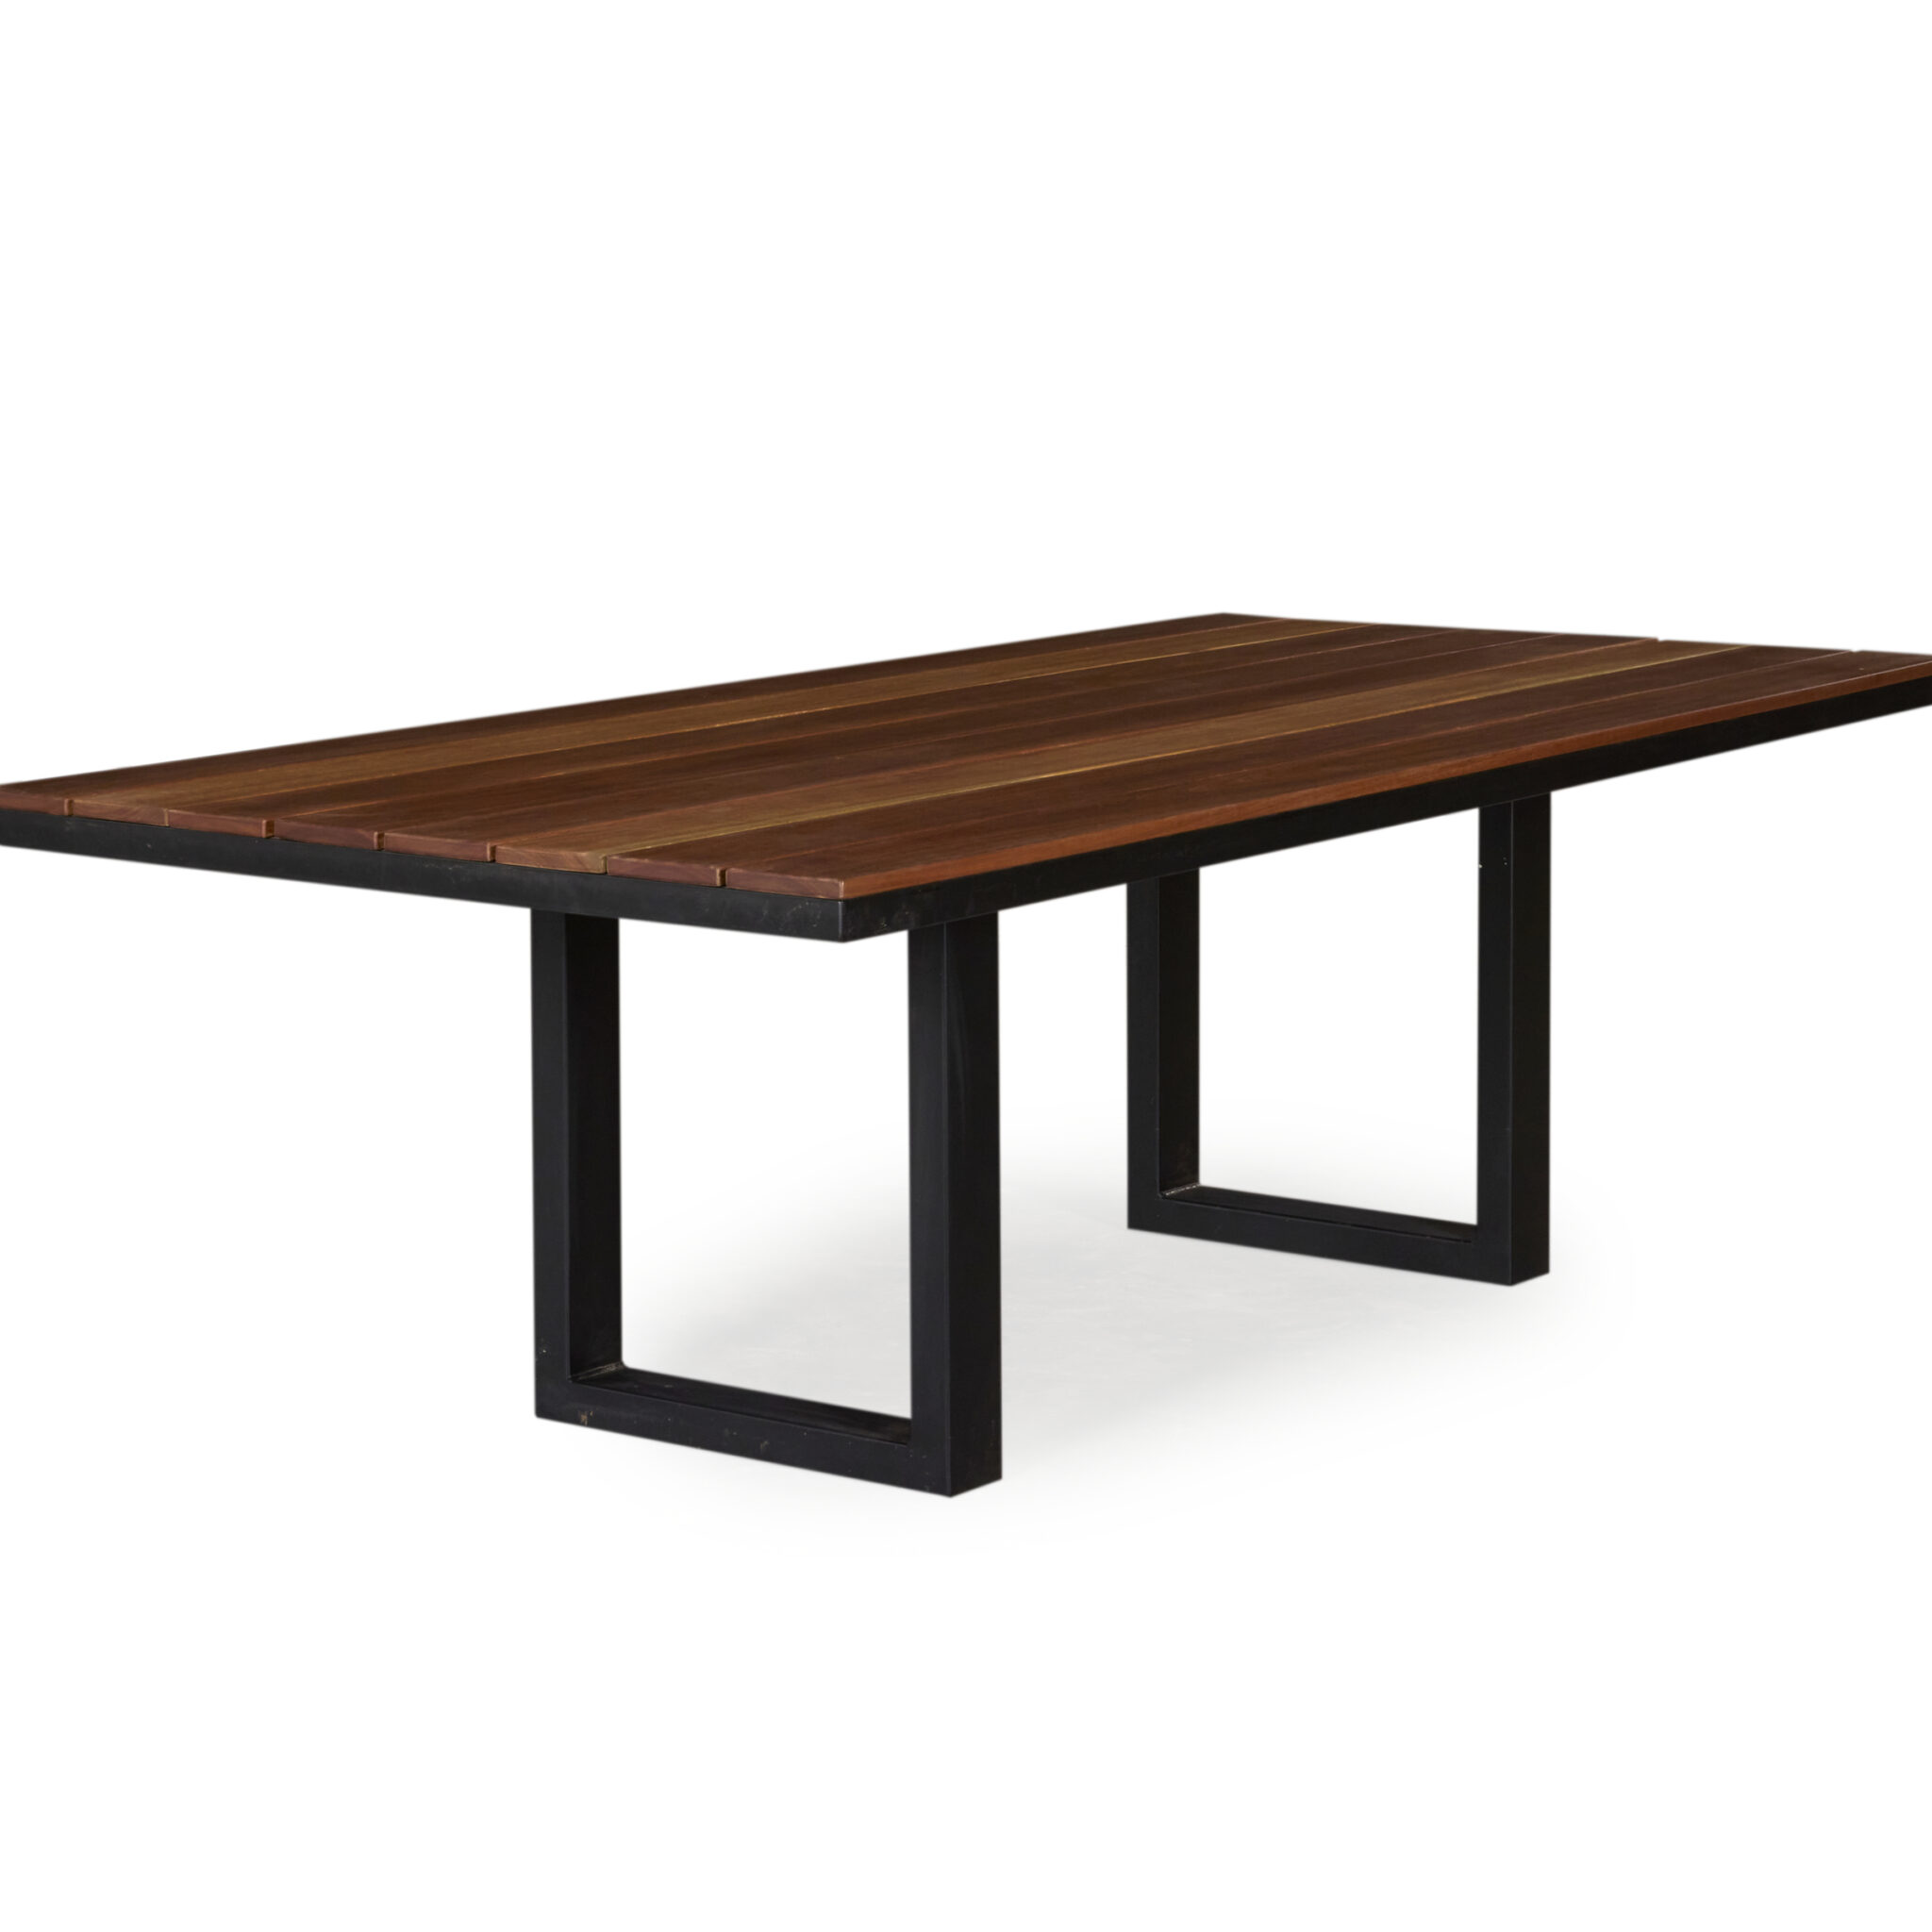 Elate Dining Table: crafted from American Oak timber, dimensions L: 2700mm x W: 1100mm x H: 750mm, custom stain in Brazil, available with U or Klein Steel base." This alt text provides a succinct description of the image and its key details.